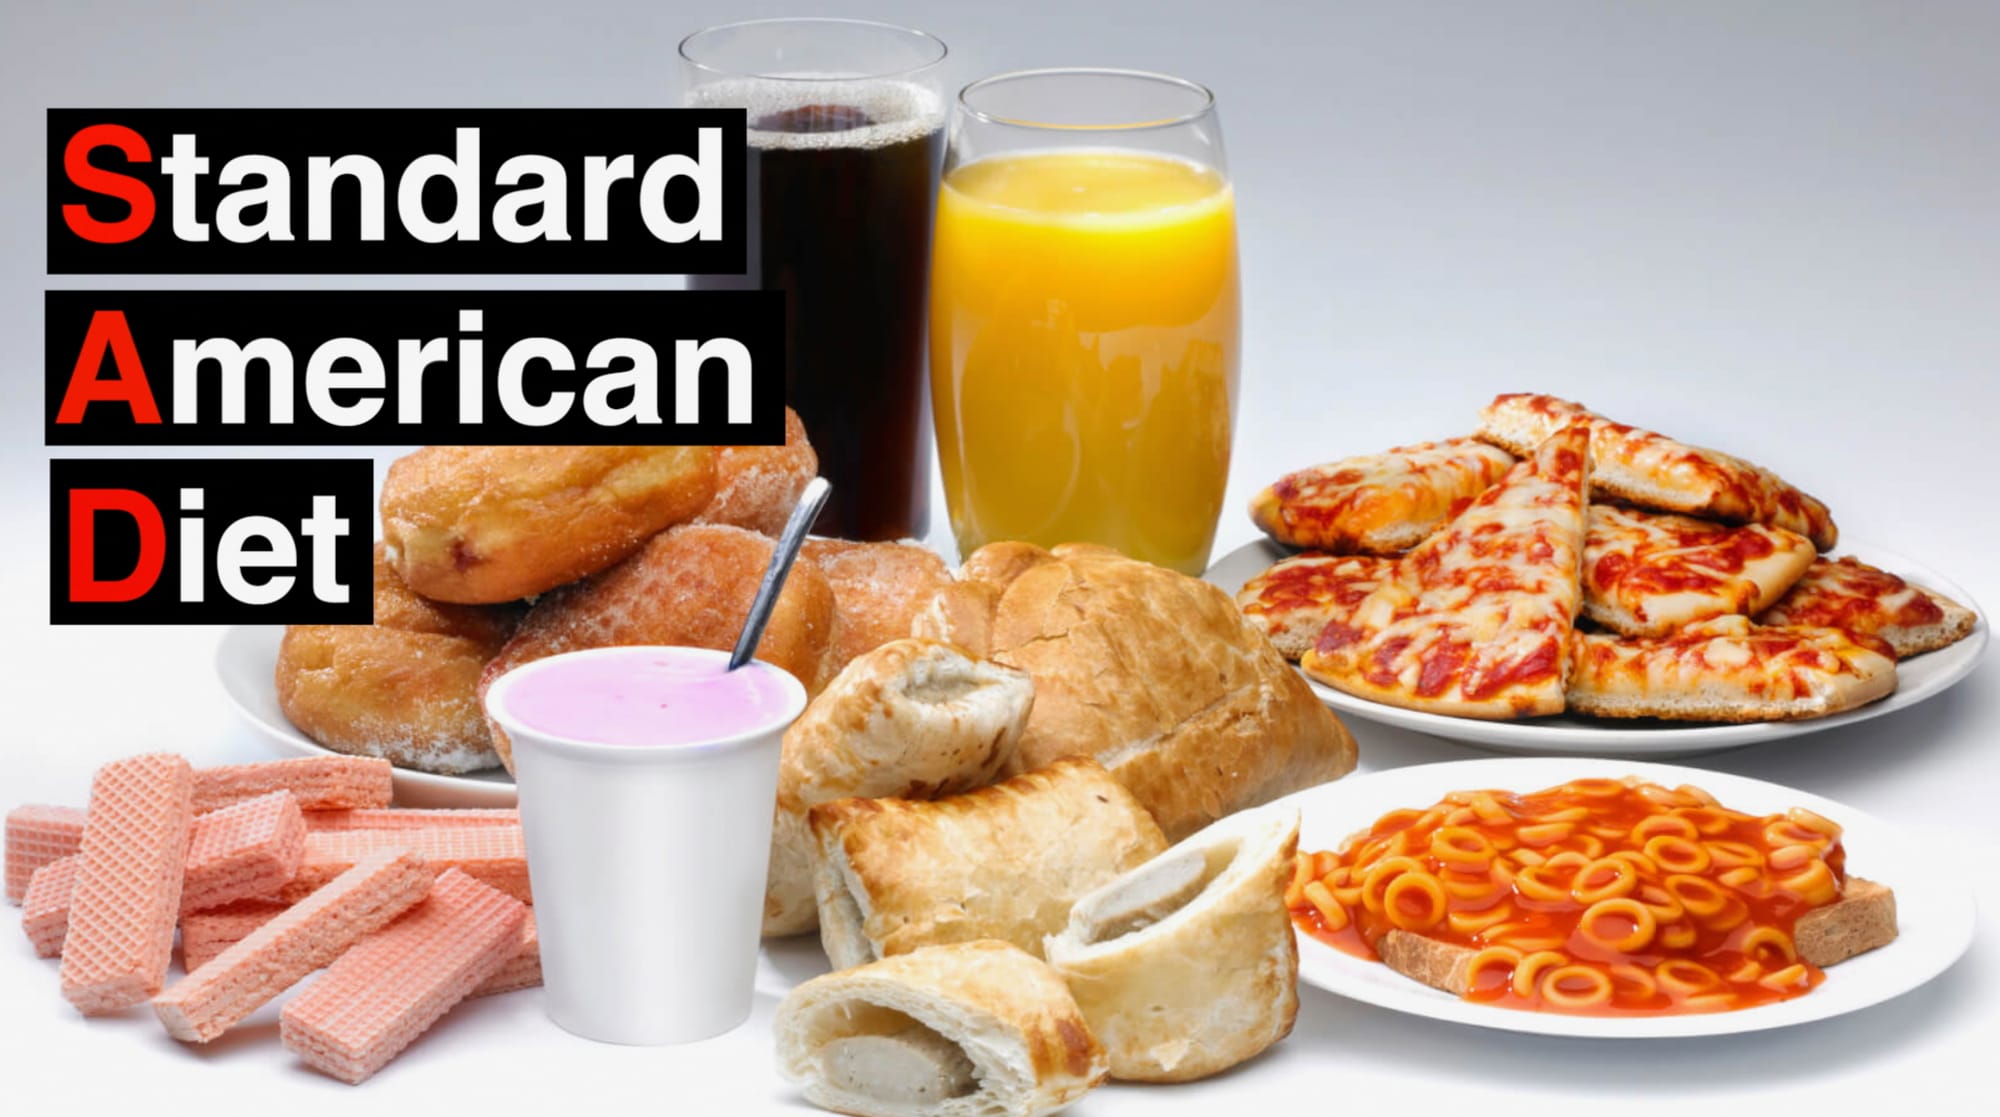 The Standard American Diet with sausage rolls, orange juice, soda, pizza, wafers and more